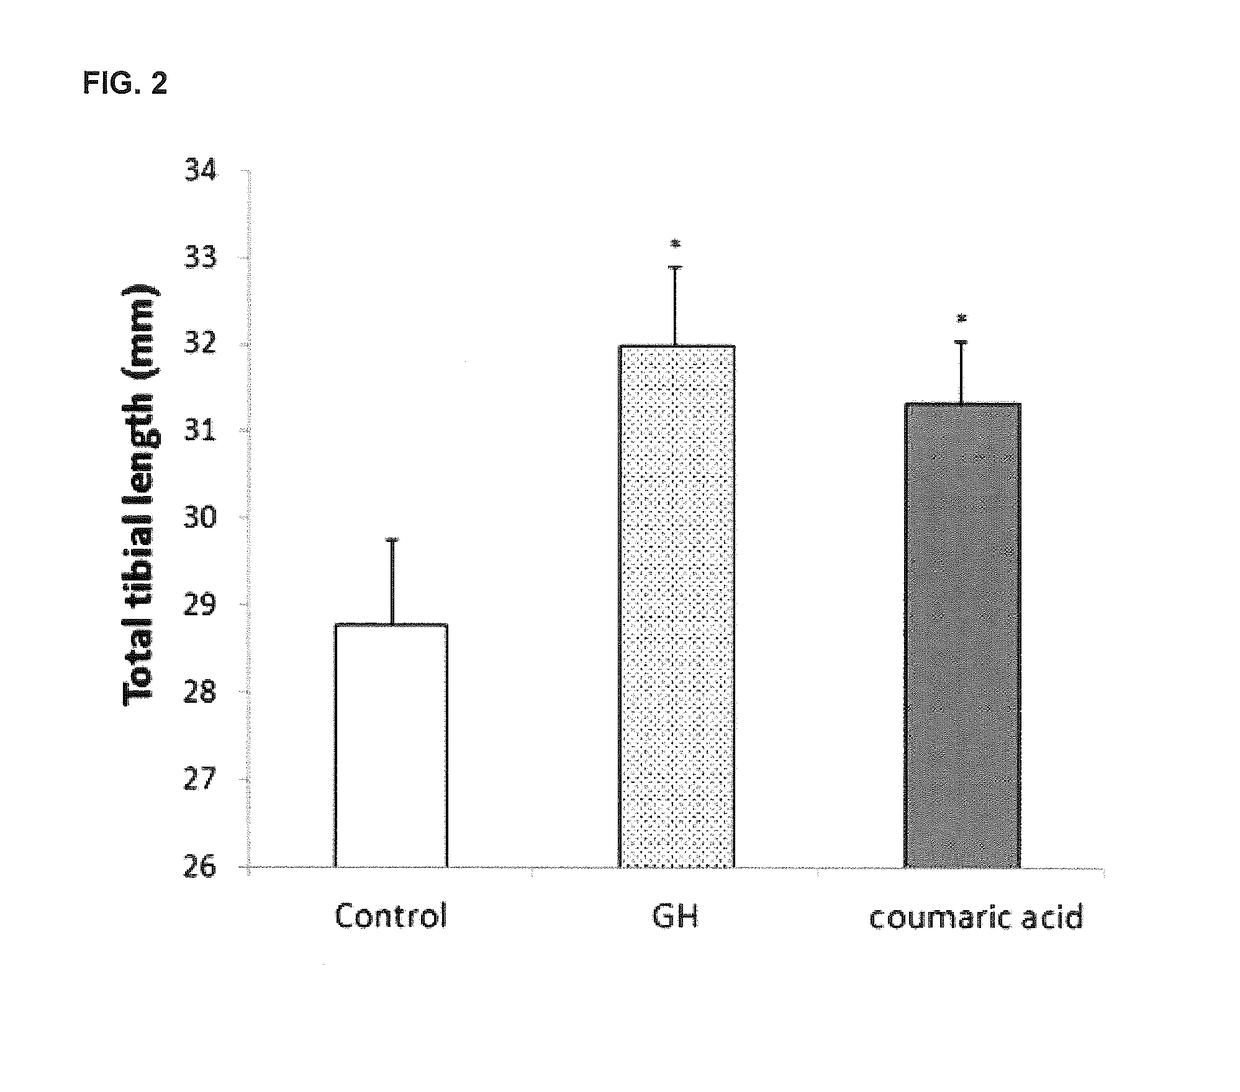 Composition for growth promotion, containing coumaric acid as active ingredient